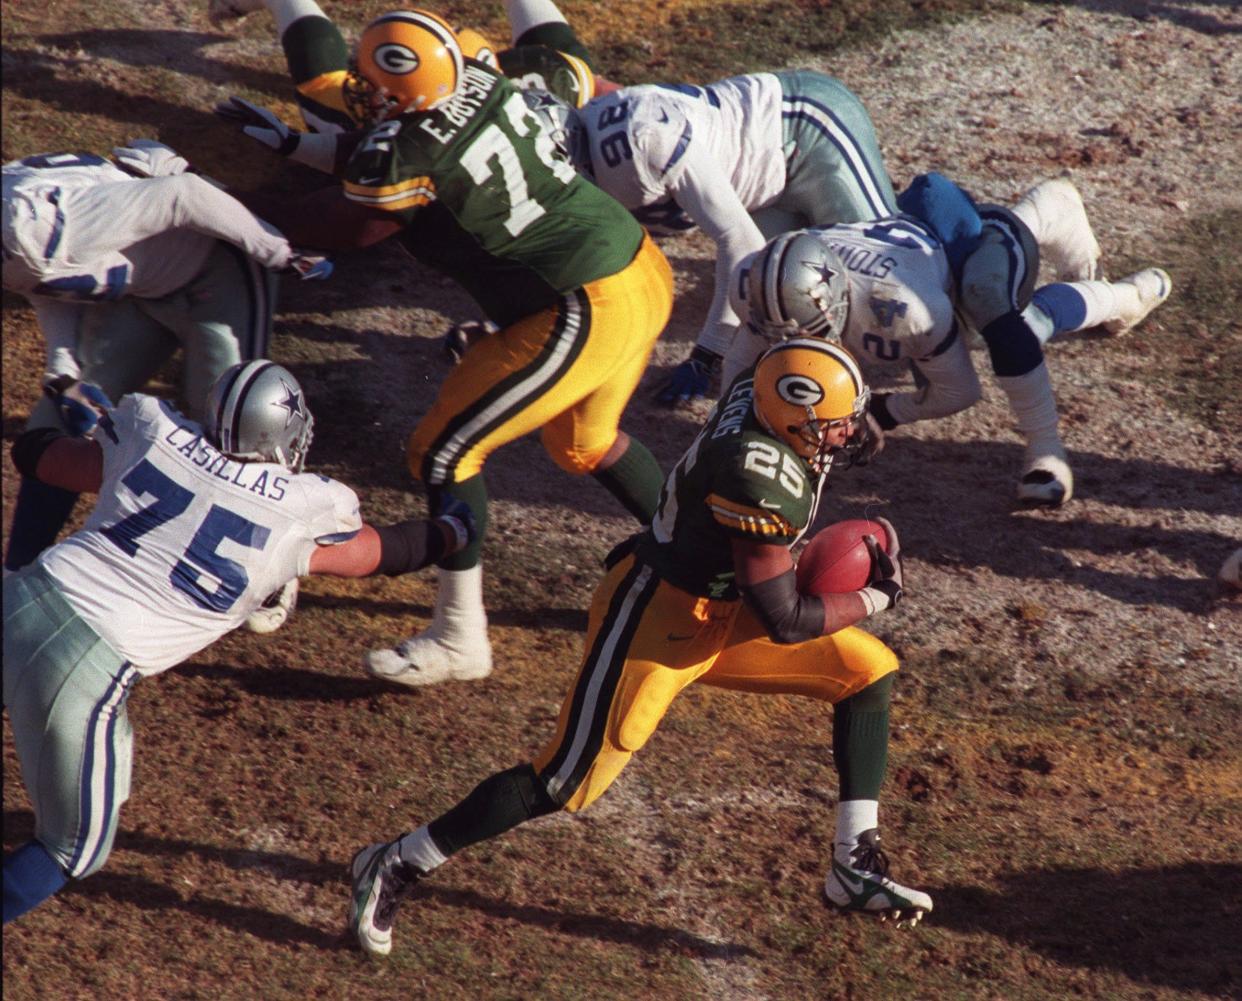 Green Bay Packers running back Dorsey Levens scores a touchdown on a 7-yard pass from Brett Favre during the first quarter of their game against the Dallas Cowboys on Nov. 23, 1997, at Lambeau Field in Green Bay. The Packers won 45-17.